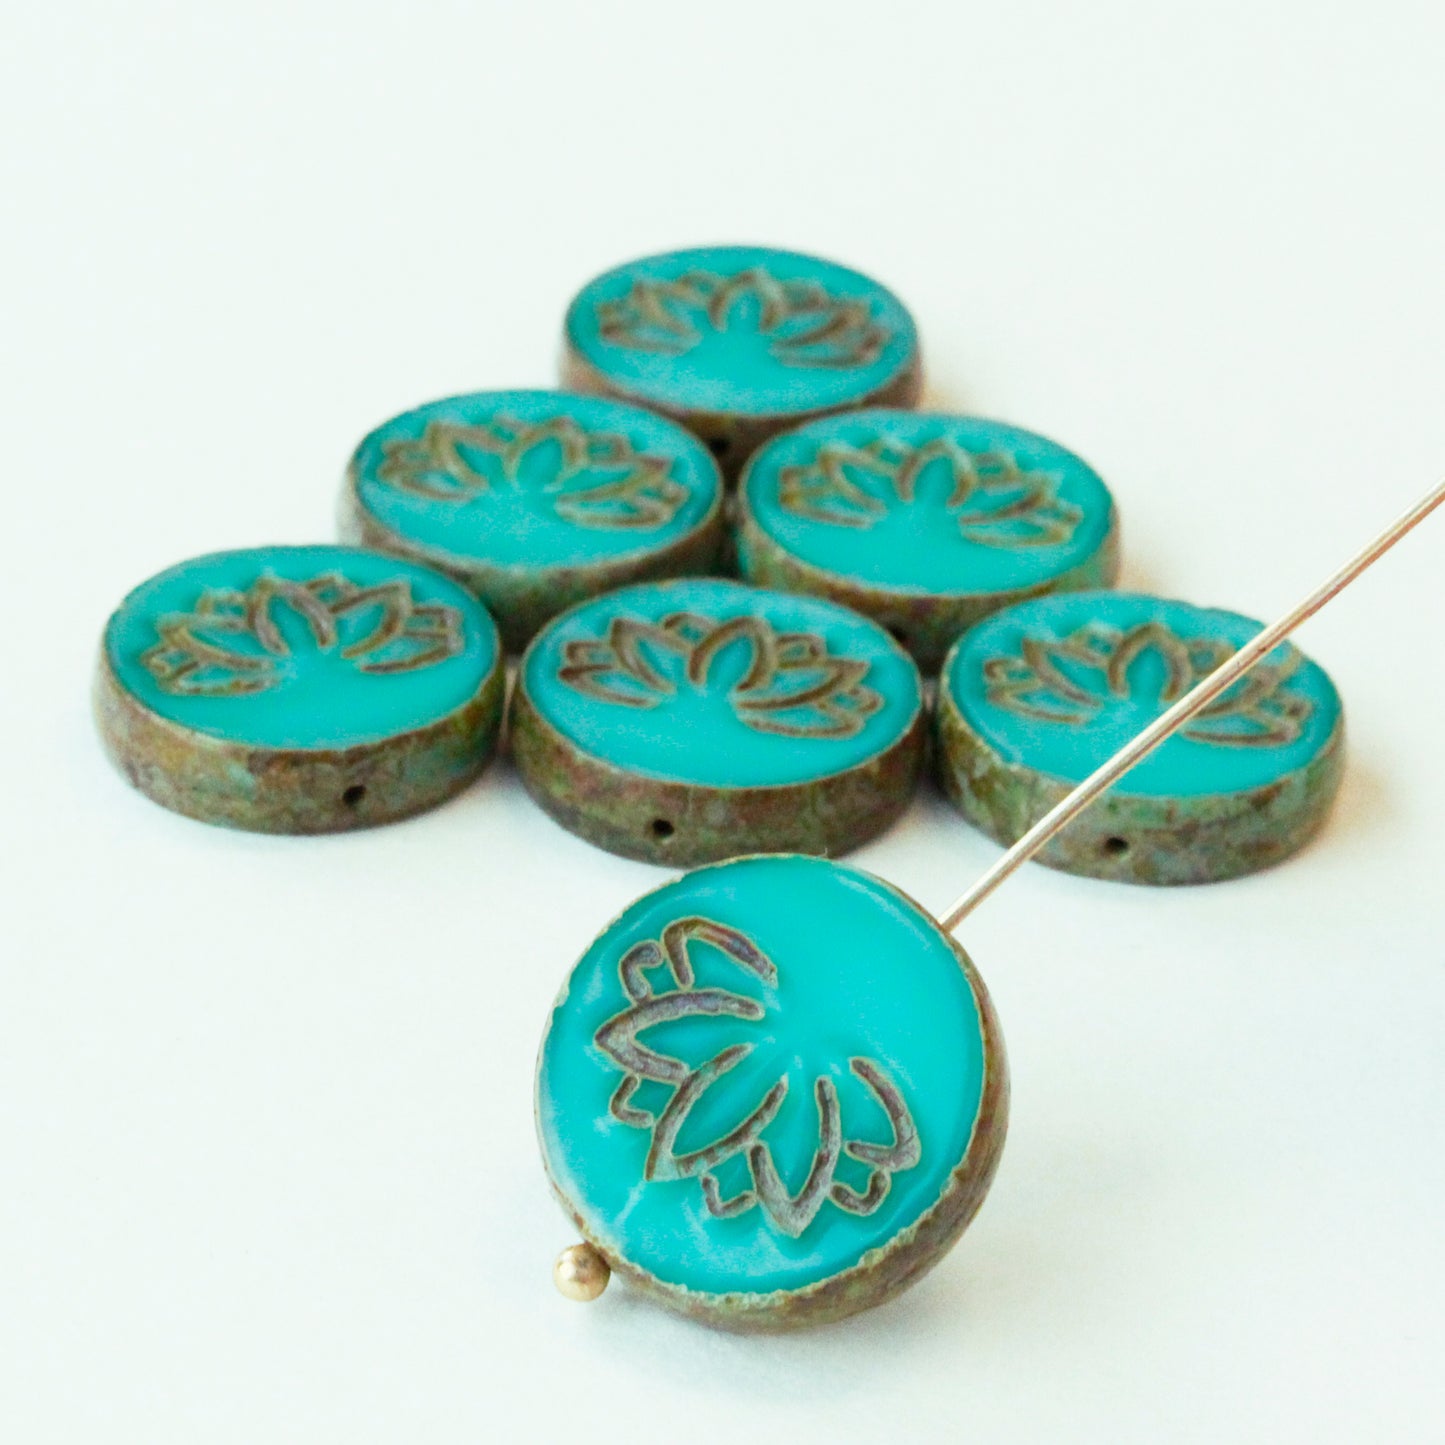 18mm Lotus Flower Beads - Opaque Turquoise - 2 or 6 beads